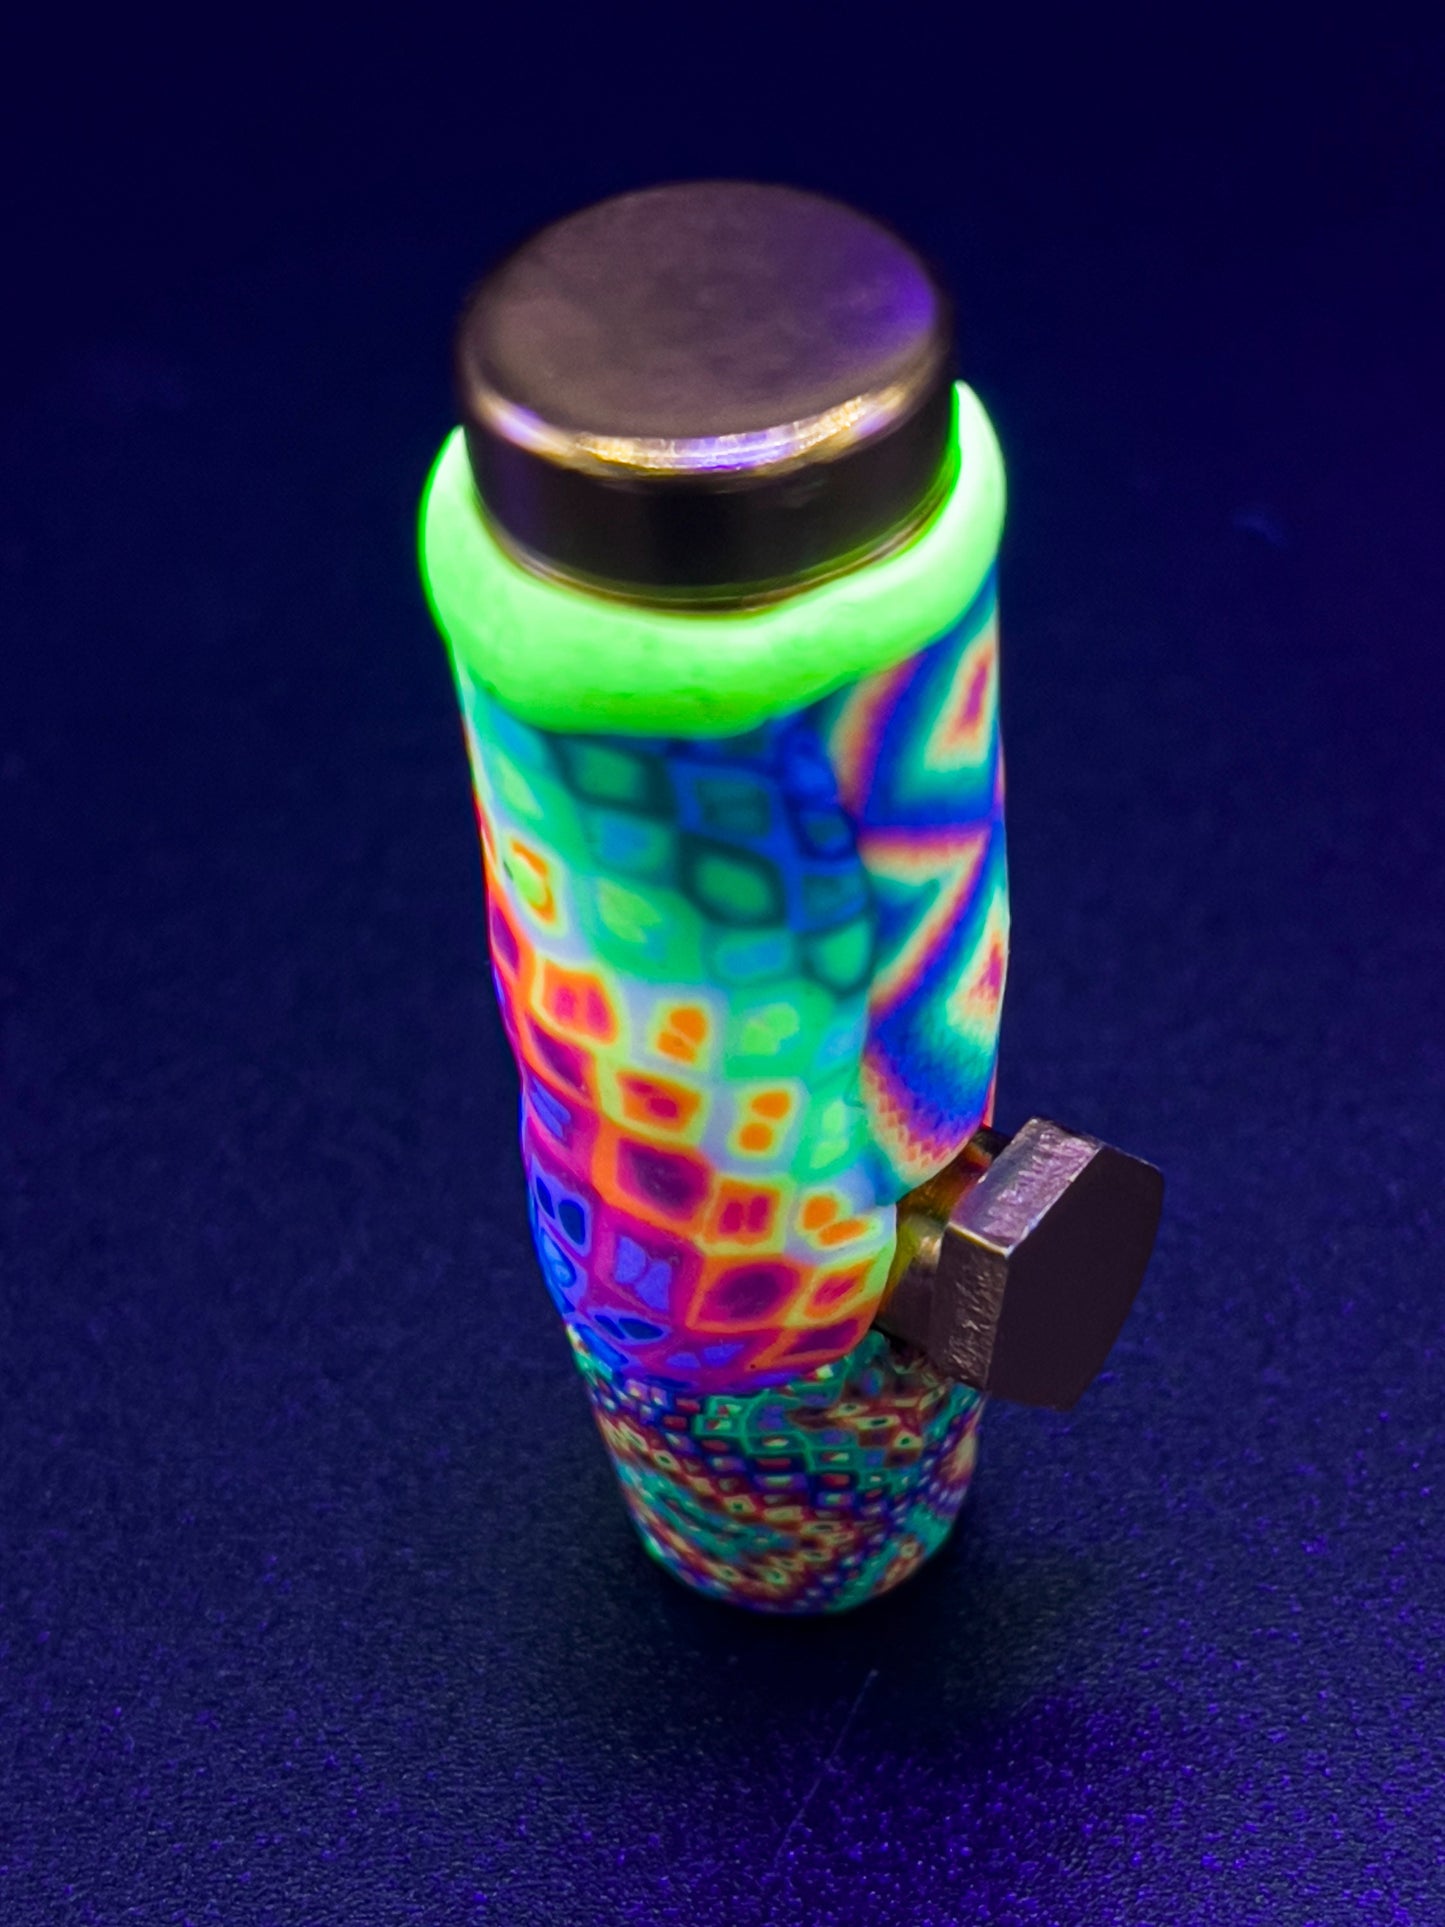 Blacklight Rapè dispenser - handmade blacklight glowing polymer clay art psychedelic eye candy made with love good quality metal container